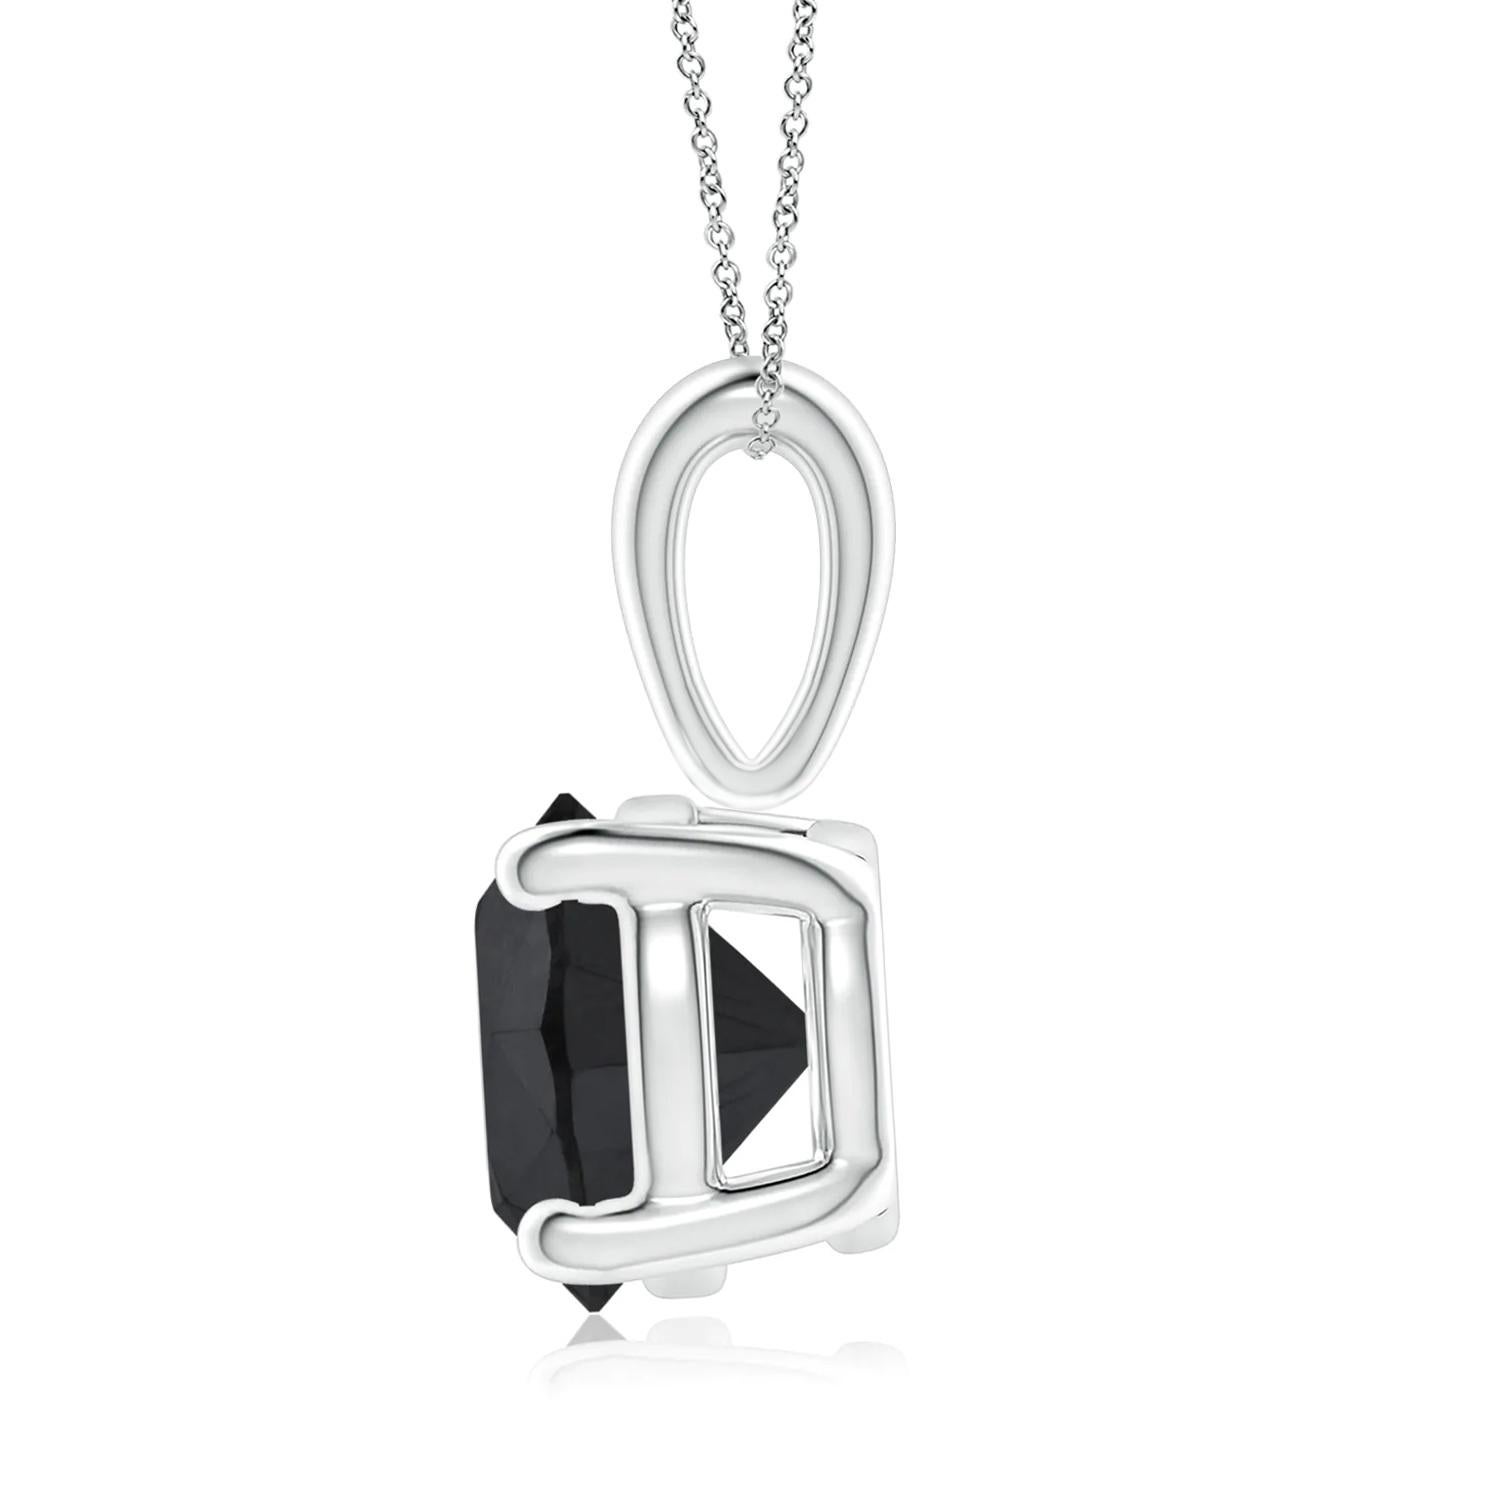 Surprise a special woman in your life with this breathtaking, statement hand crafted solitaire black diamond necklace. This eye-catching pendant necklace features a 1.76 carat round cut black diamond, measuring 6.73 x 6.71 x 5.25 mm set in 14k white